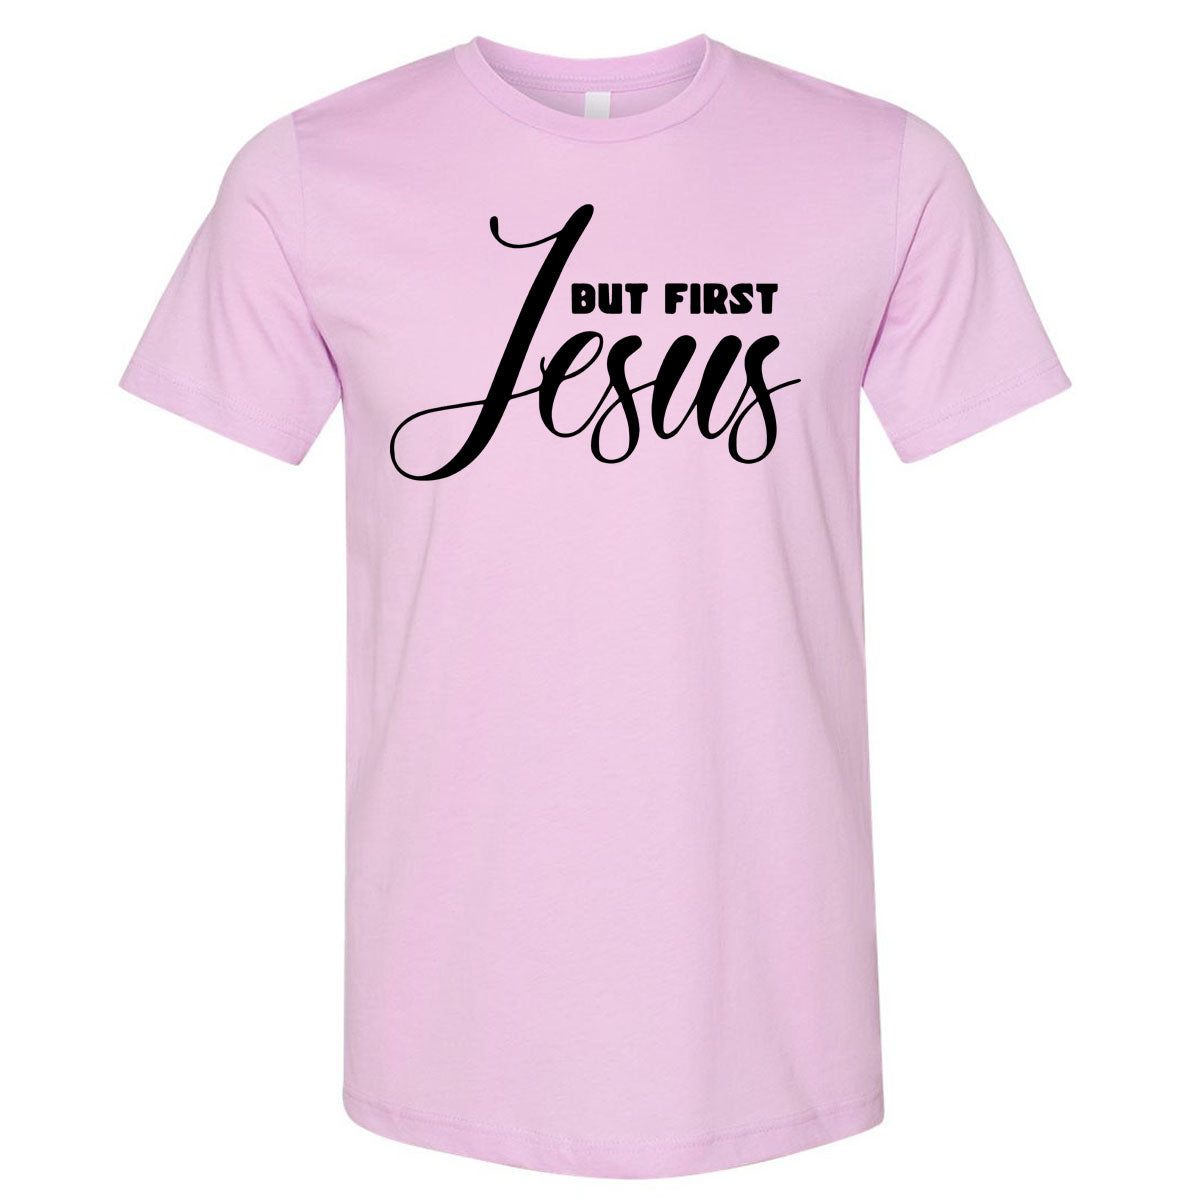 But First Jesus - Lilac Short Sleeve - Southern Grace Creations